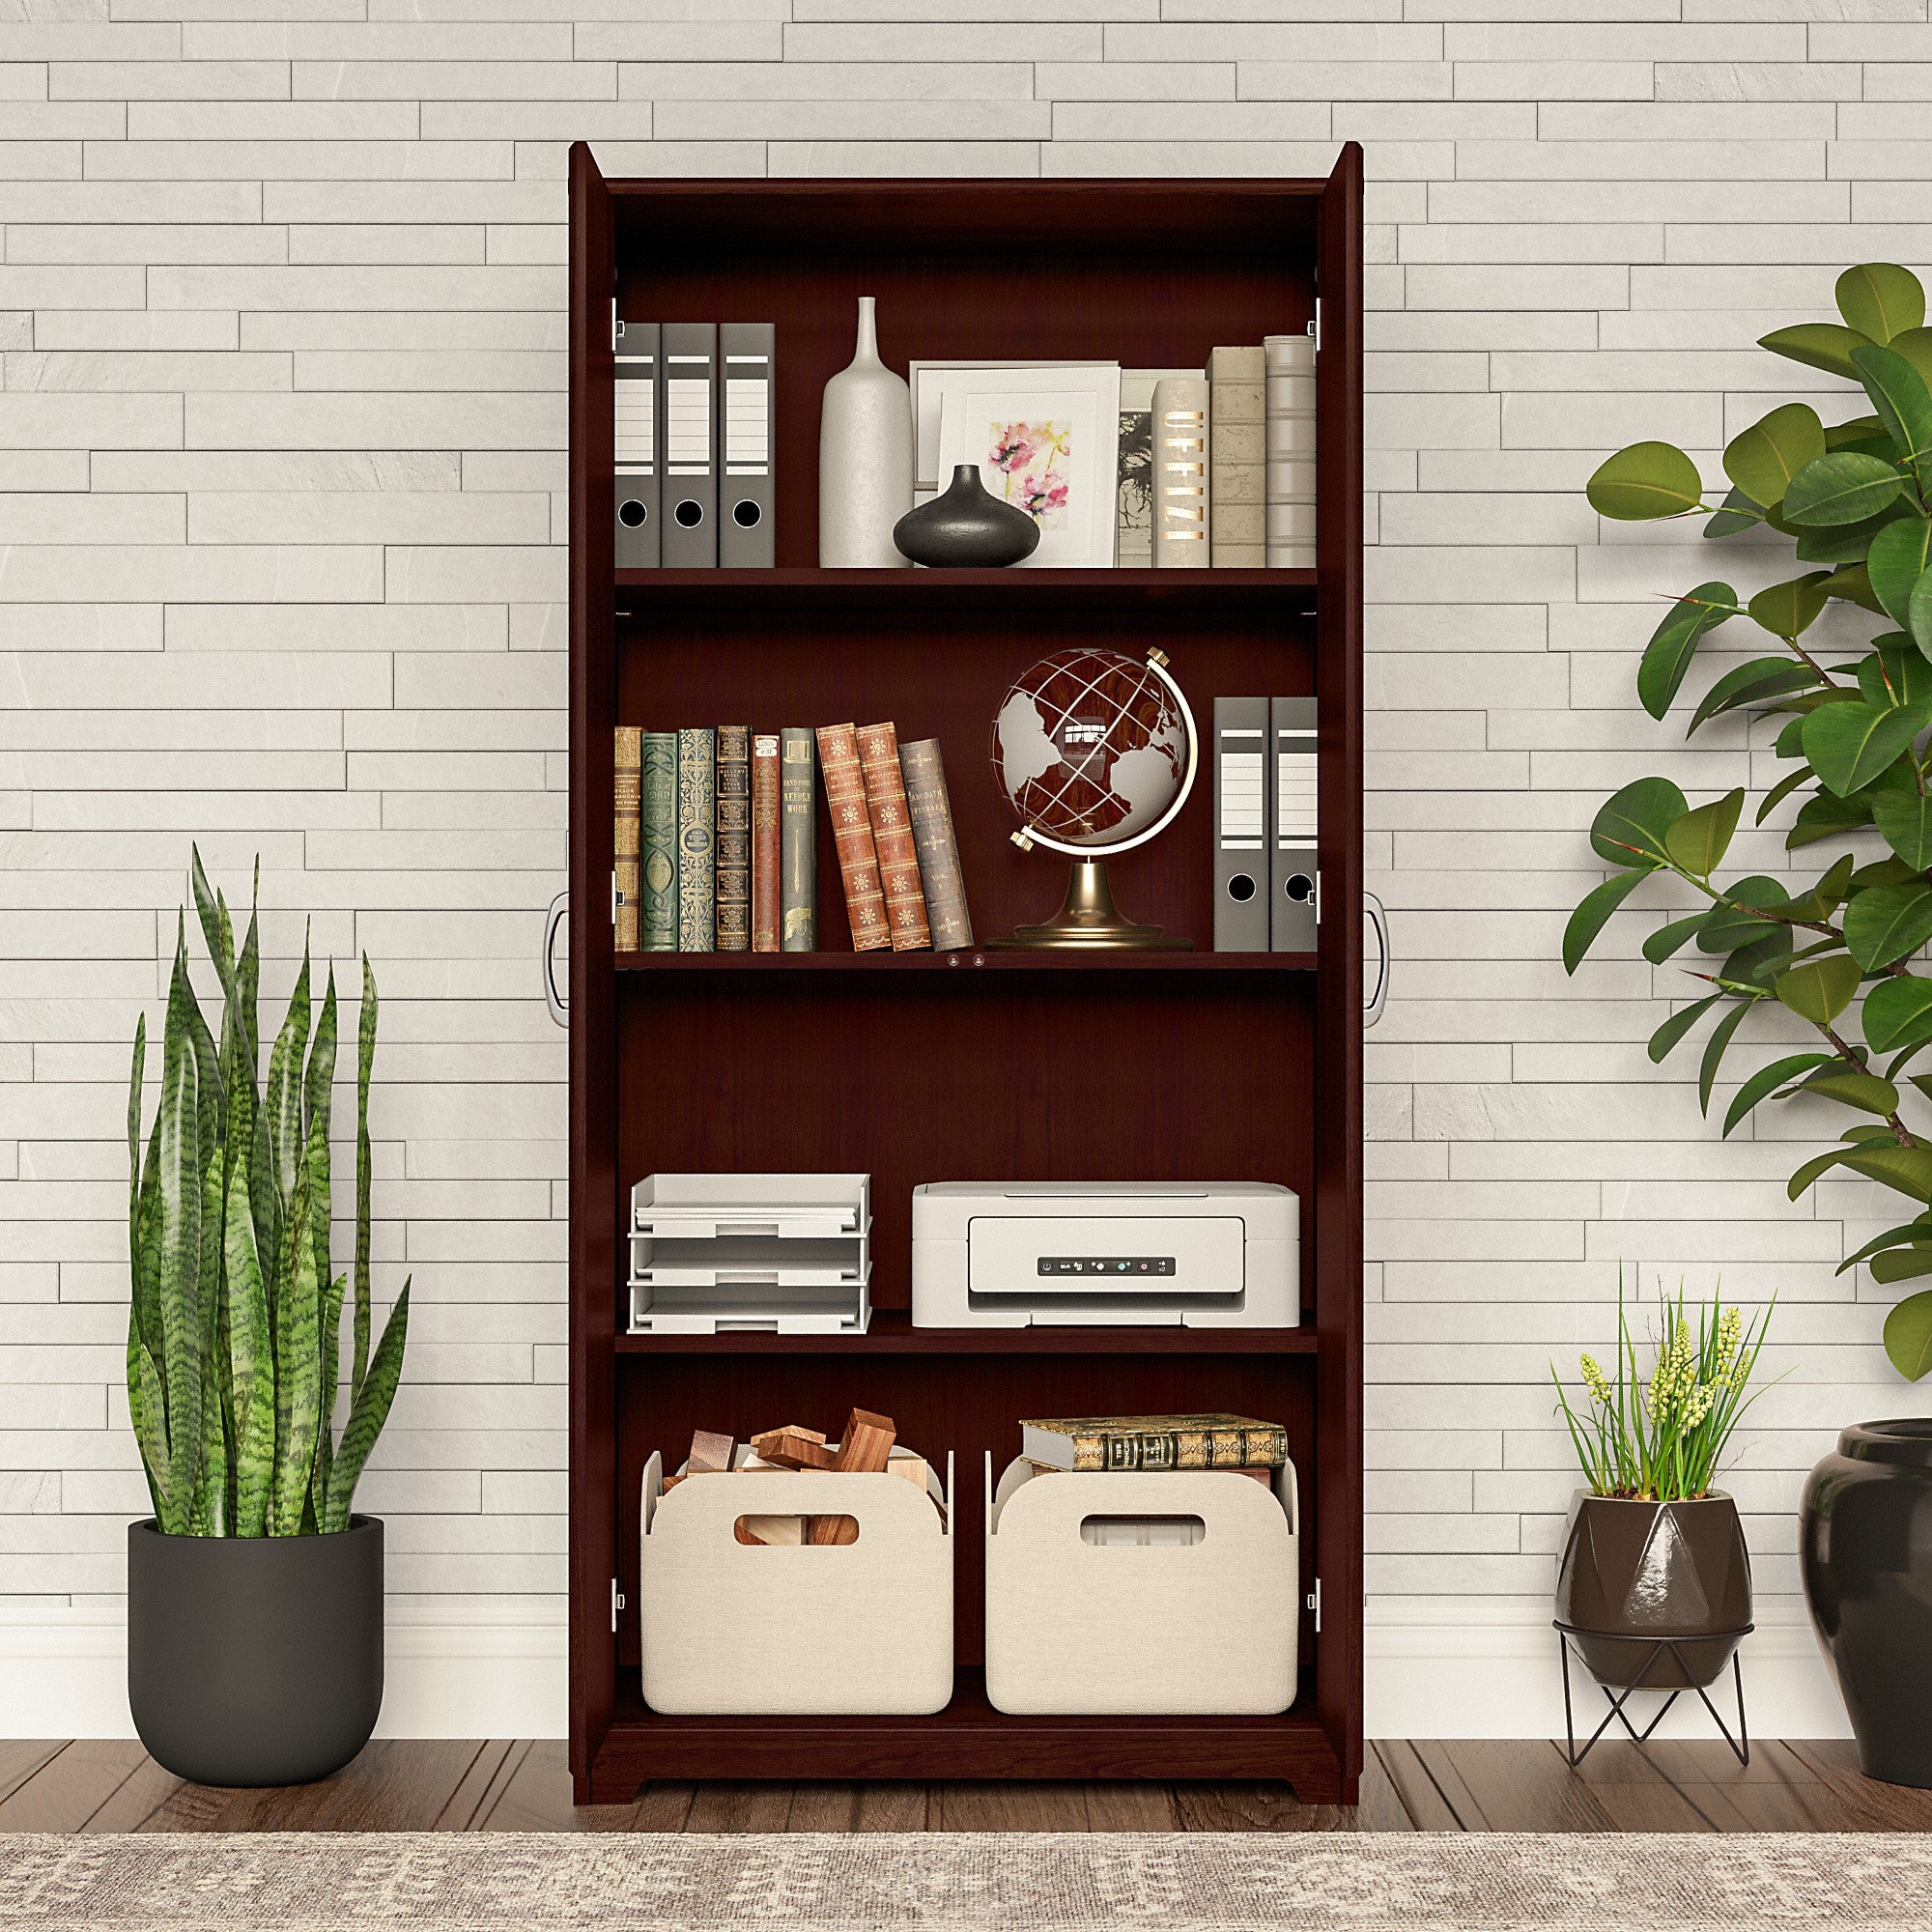 Bush Furniture Cabot Tall Storage Cabinet with Doors